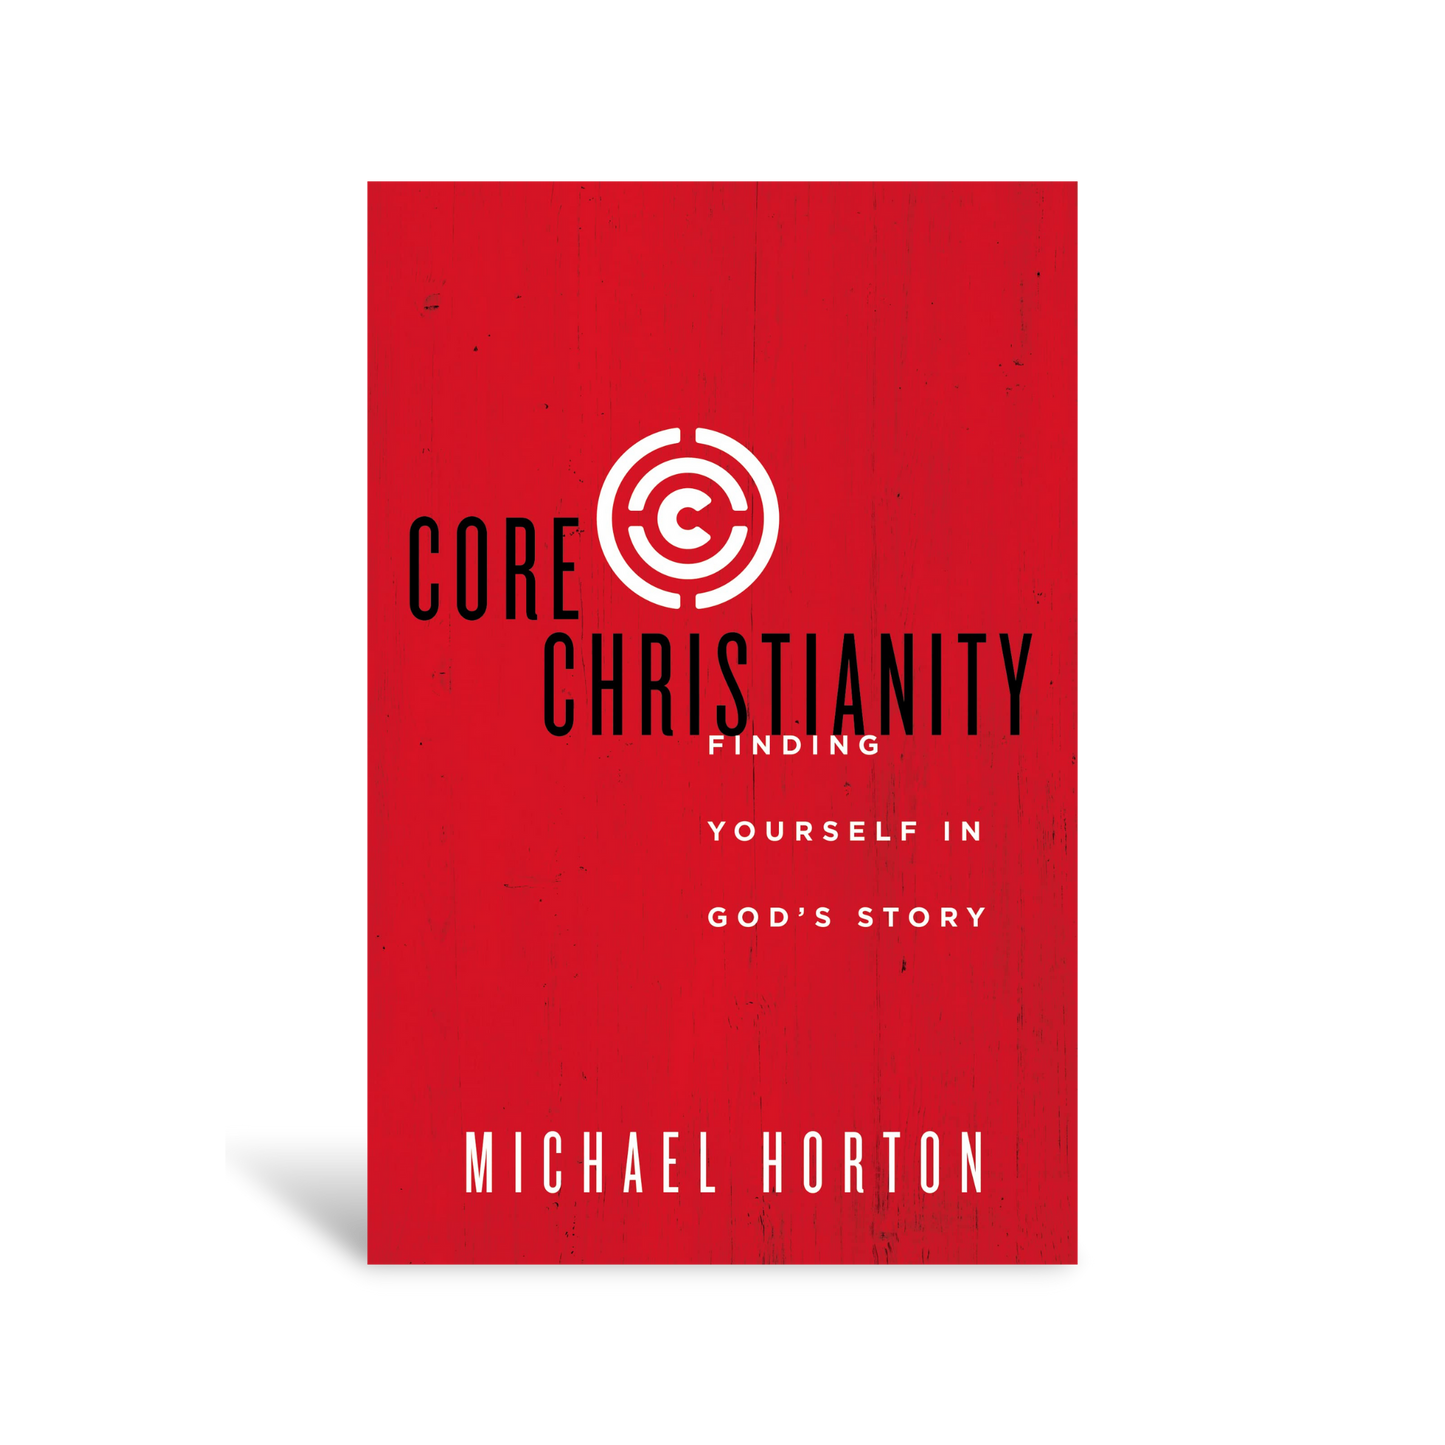 Core Christianity: Finding Yourself in God's Story